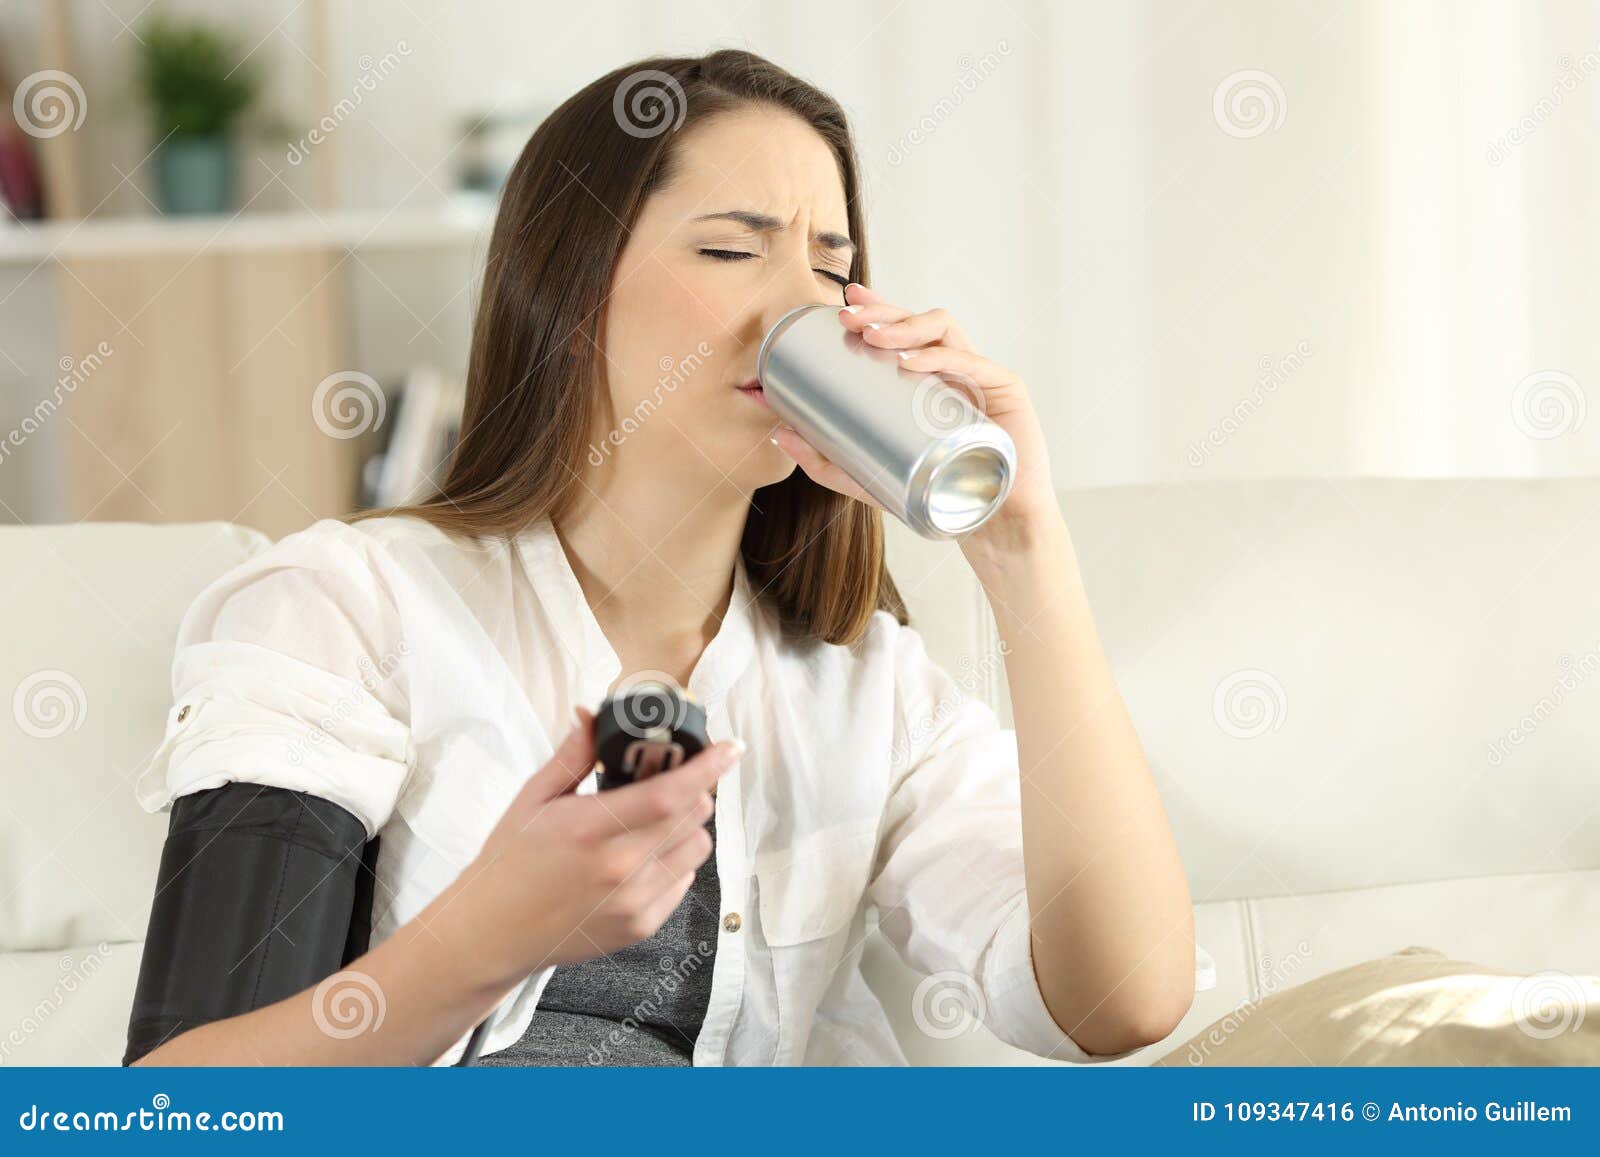 woman with low blood pressure drinking sweet soda